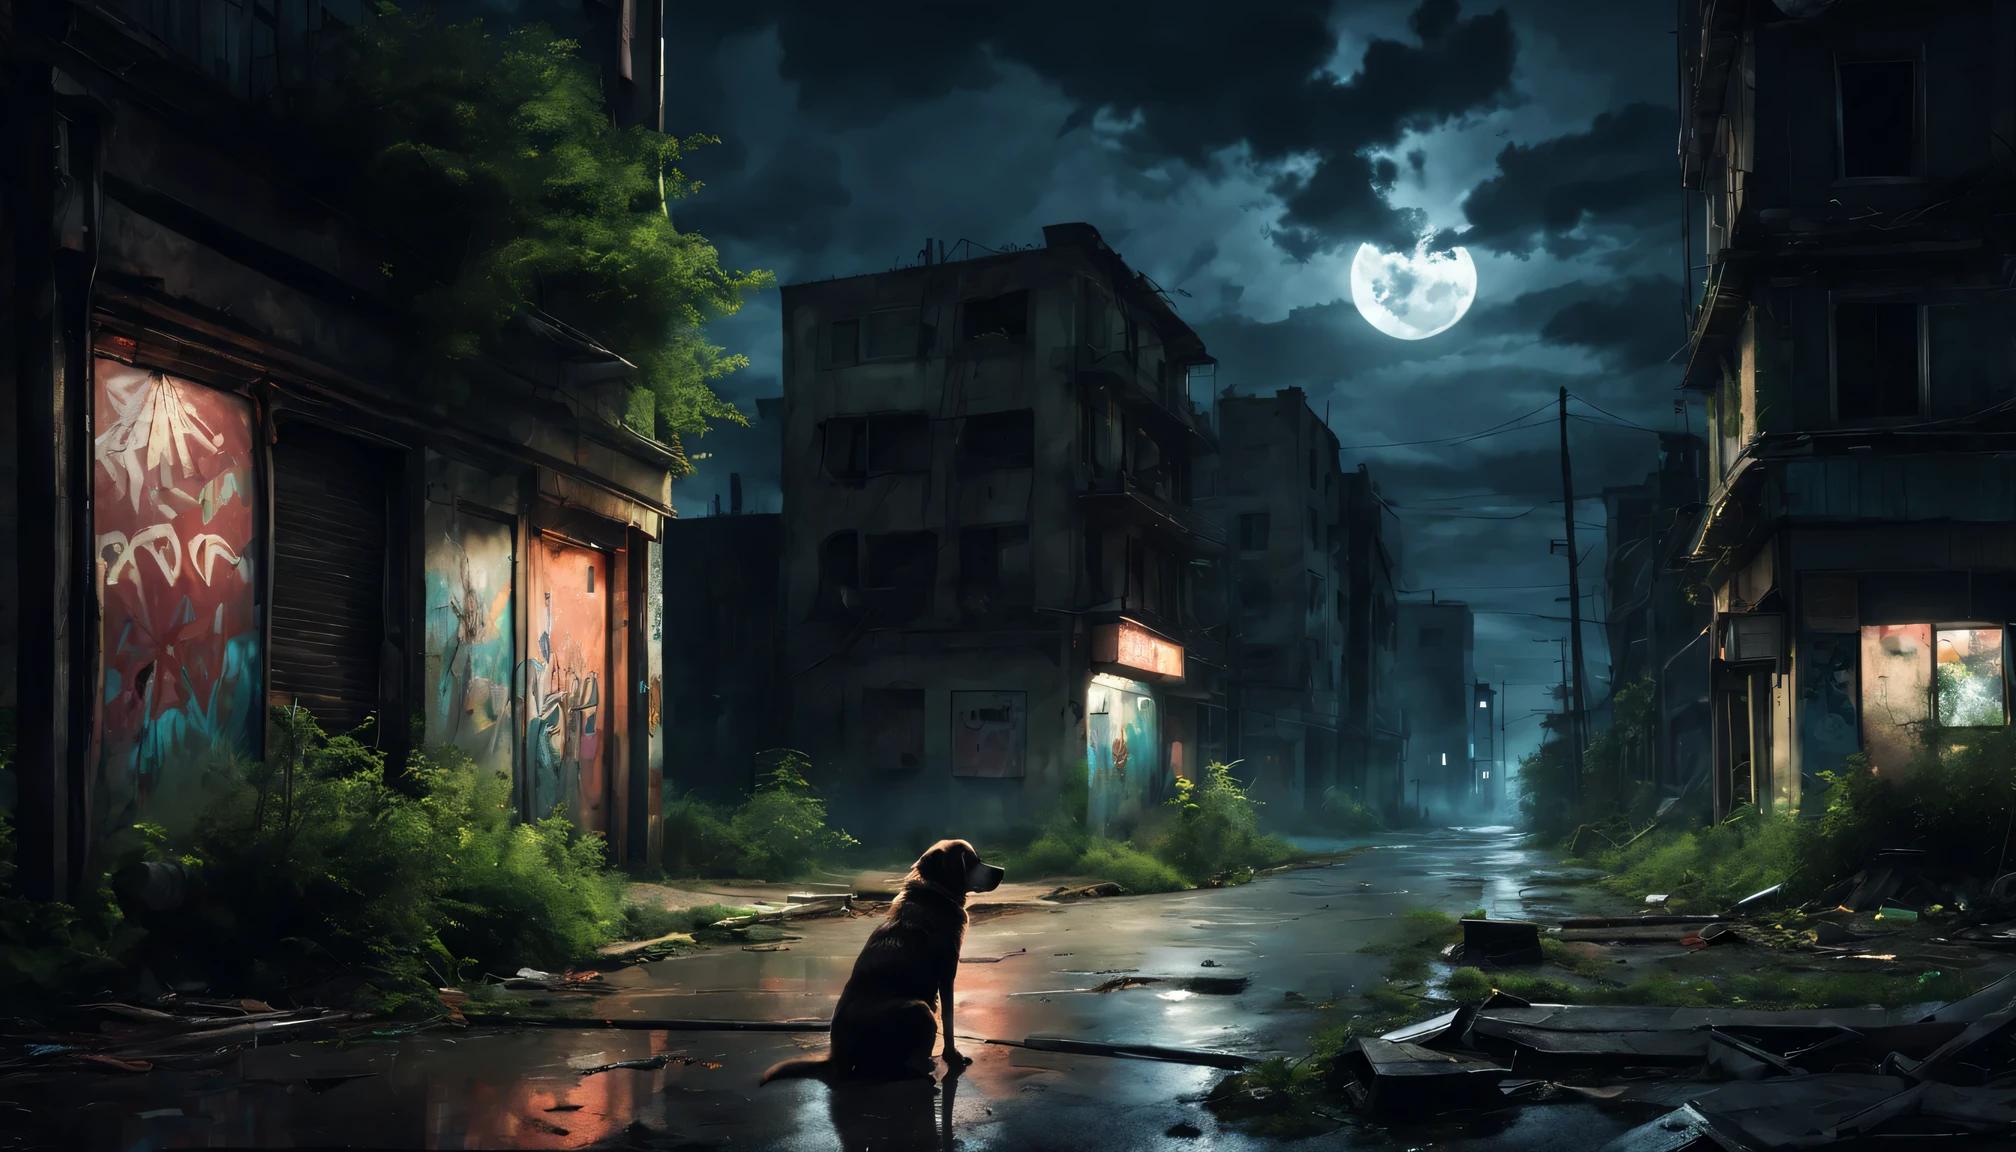 abandoned city nighttime scene，Desolate atmosphere，nighttime scene，Abandoned buildings，Shabby street graffiti，A hungry stray dog is looking for food，Ominous darkness，overgrown vegetation，Post-apocalyptic feeling melancholic color palette，dramatic contrast，intense shading，Clouds in the moonlight，Surreal atmosphere，dystopian background，abrasion，A sky full of star quality,4K,8k,A high resolution,tmasterpiece:1.2,ultra - detailed,current:1.37,